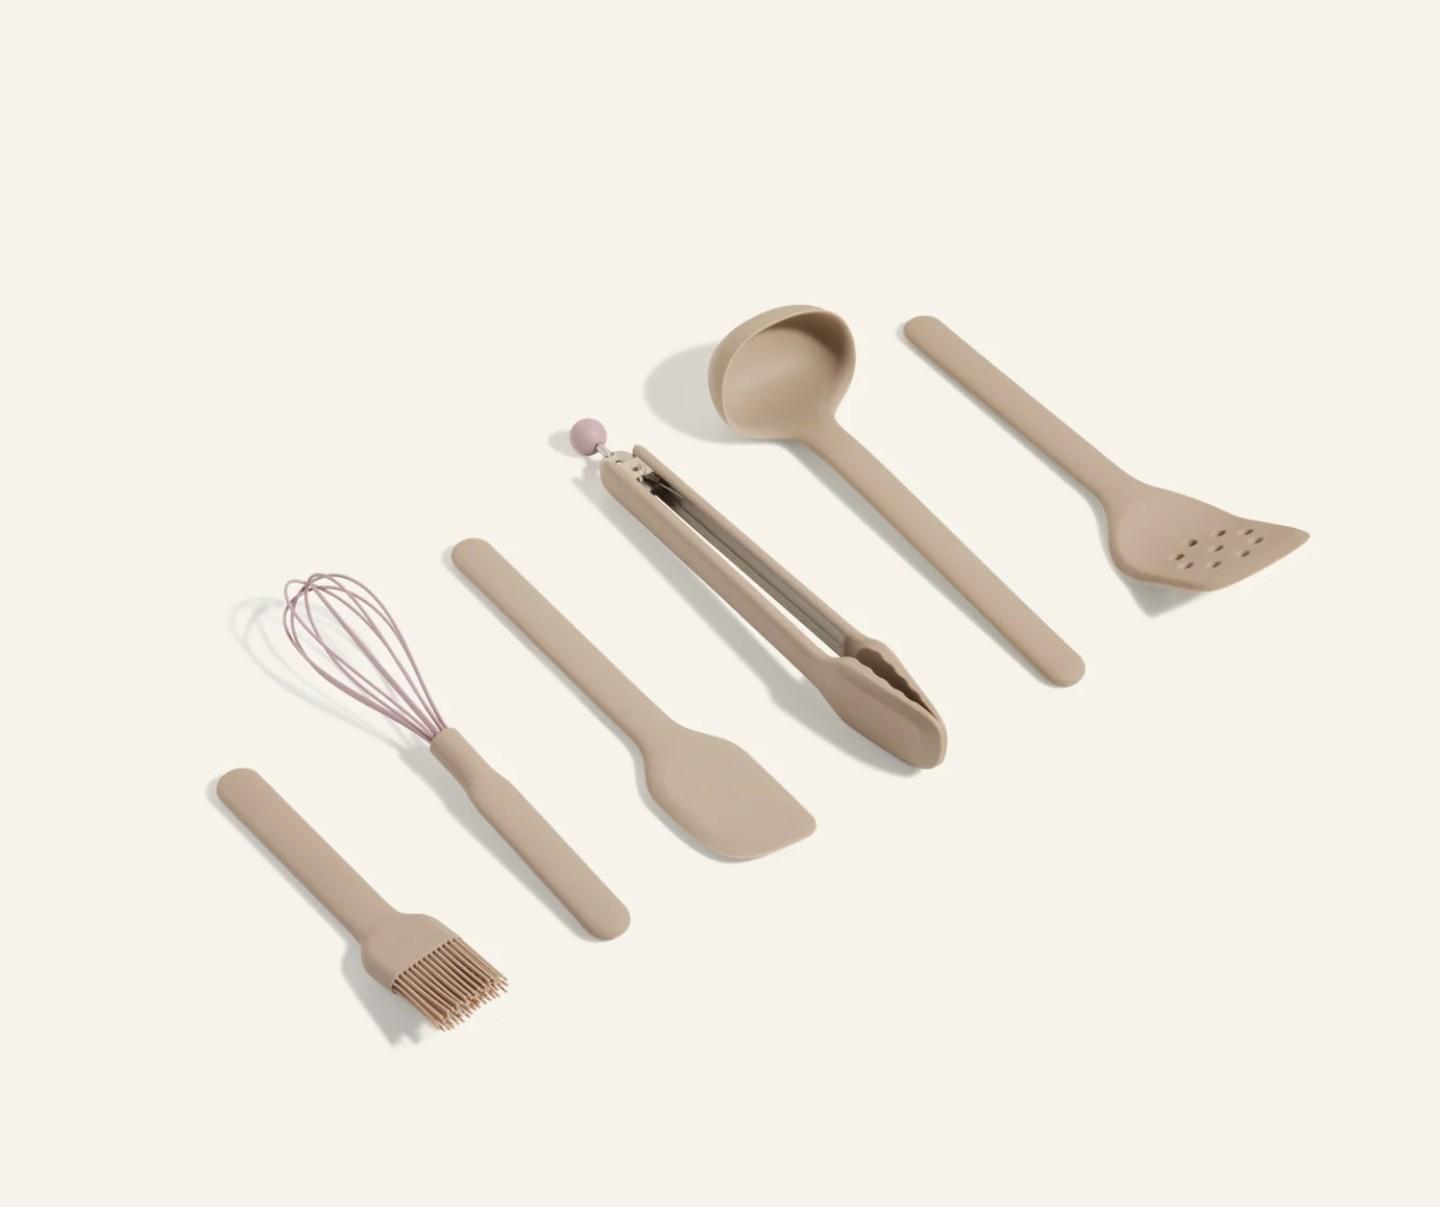 The best non toxic cooking utensils: Our Place silicone set